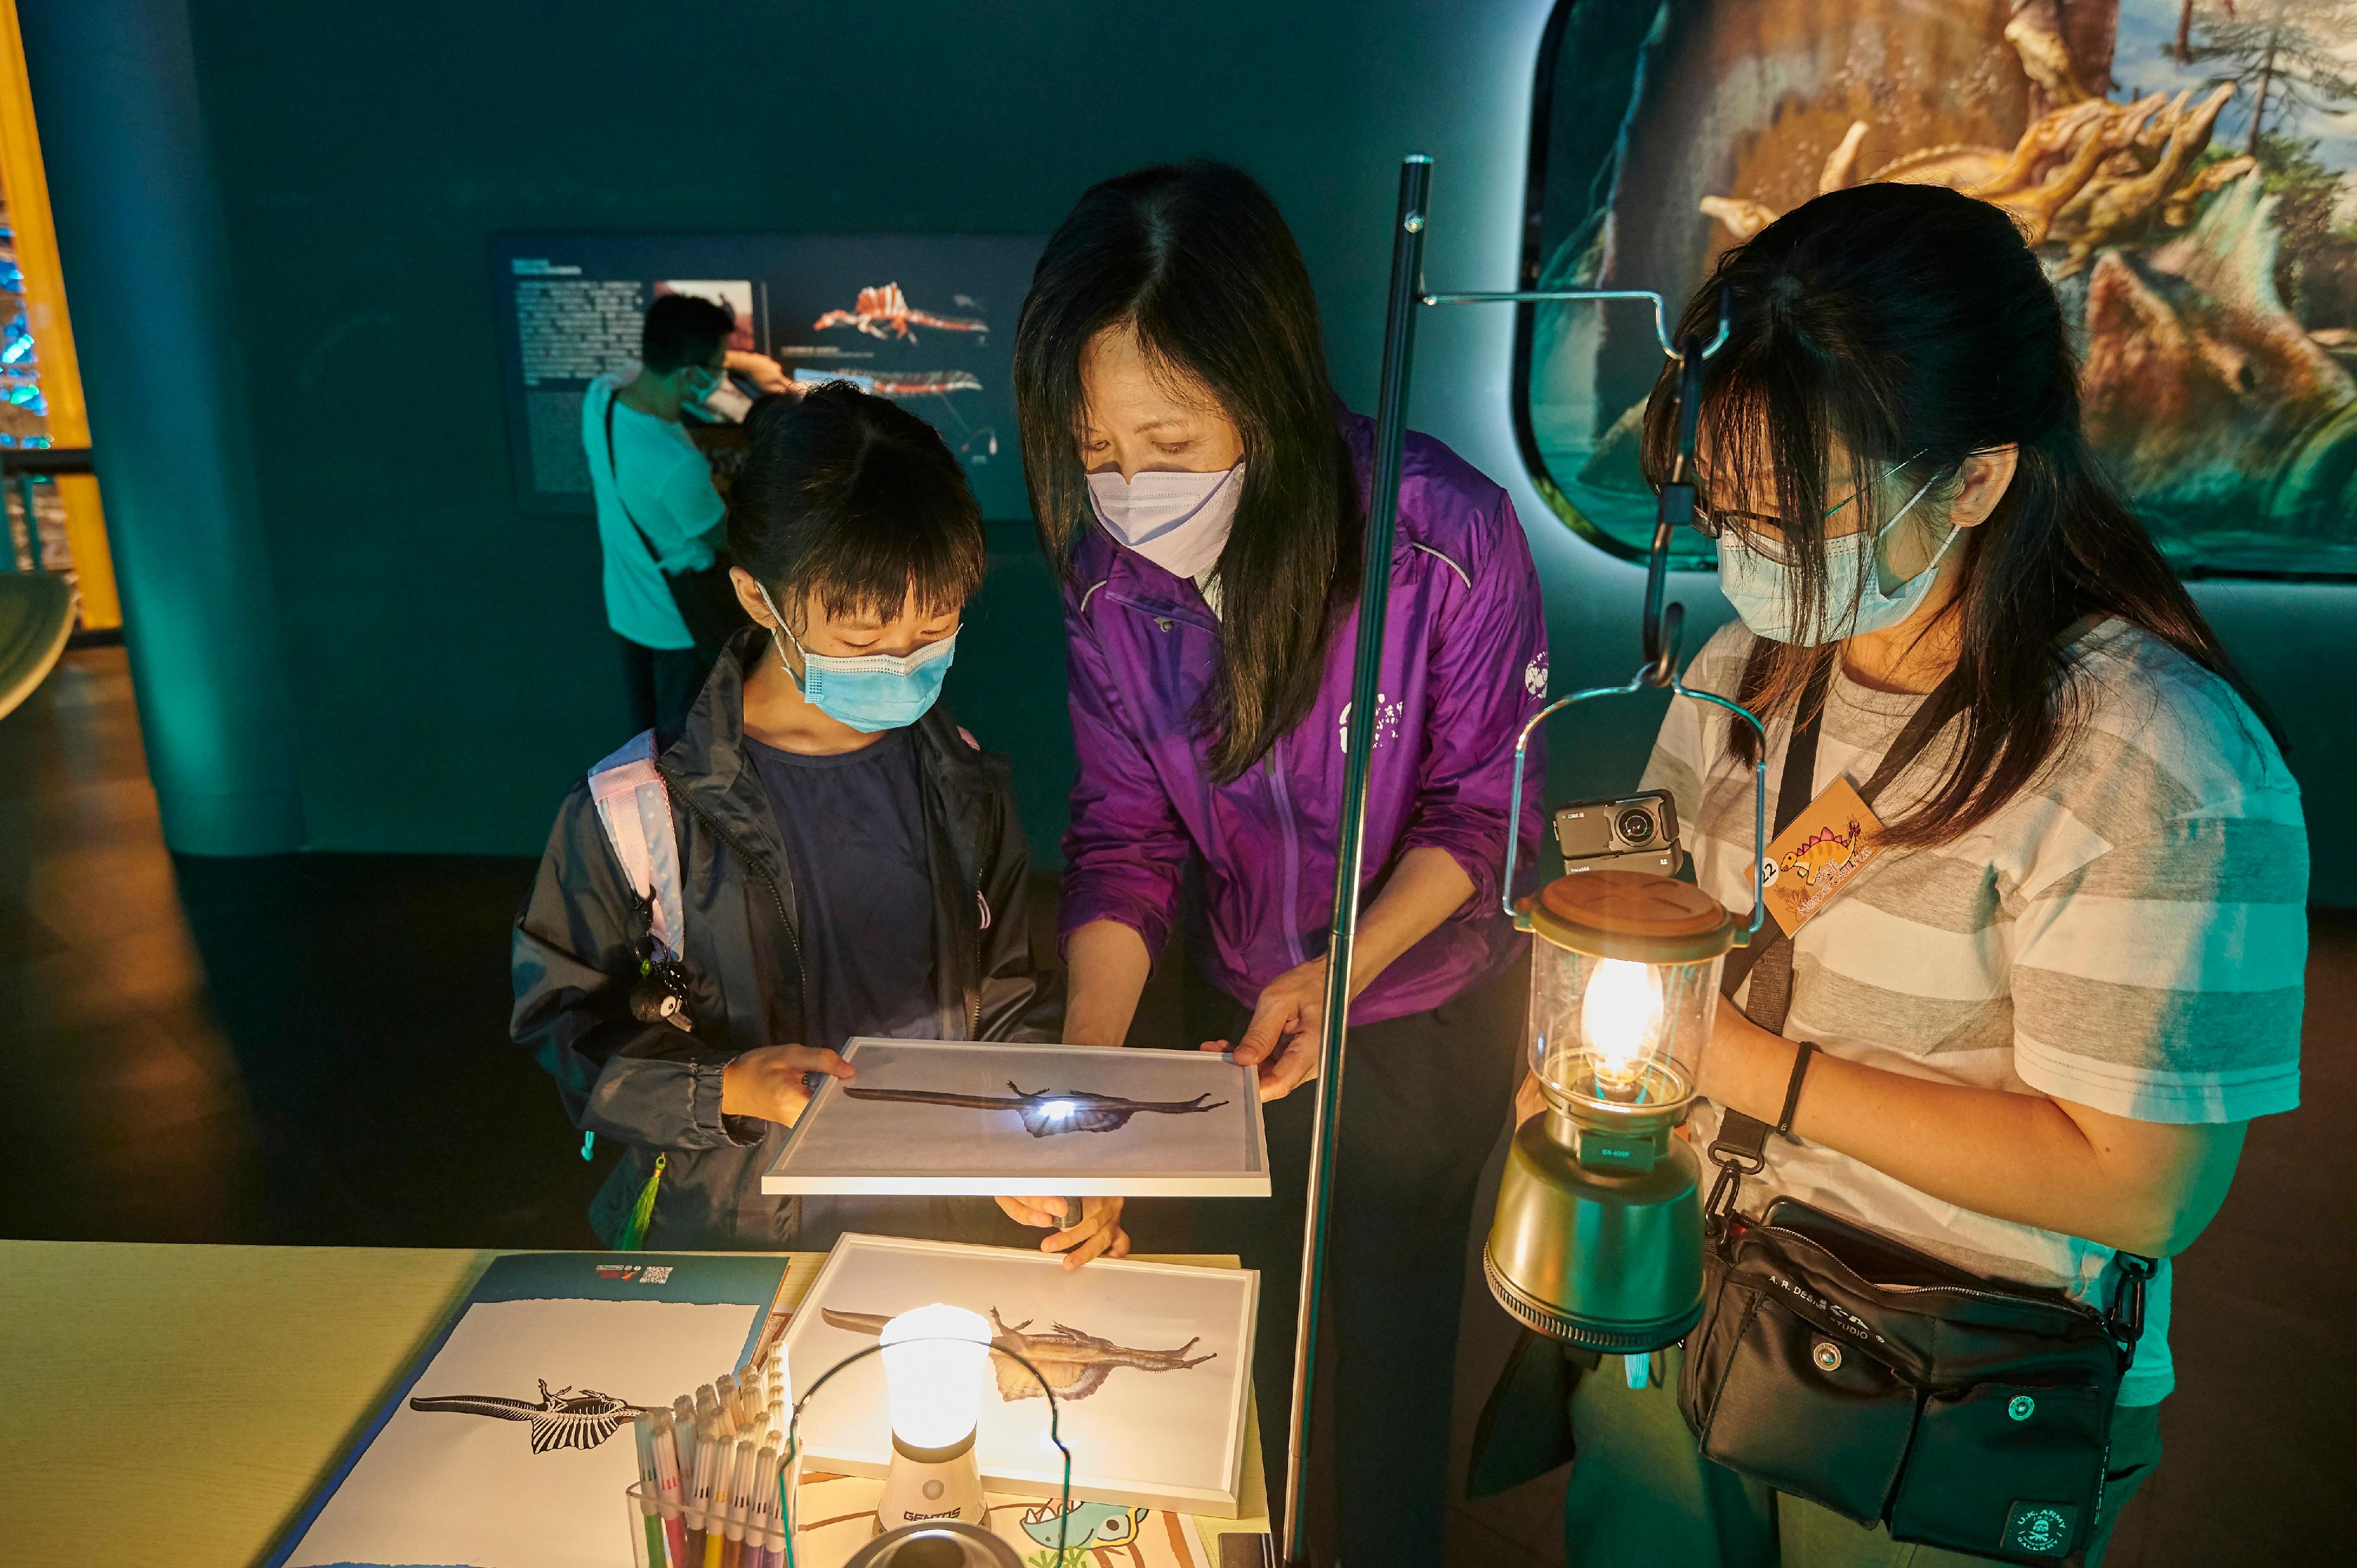 The Leisure and Cultural Services Department (LCSD) will start recruiting museum volunteers in March to serve in museums under the LCSD in various aspects. Photo shows a volunteer assisting participants in the A Night with Dinosaurs sleepover programme held at the Hong Kong Science Museum.